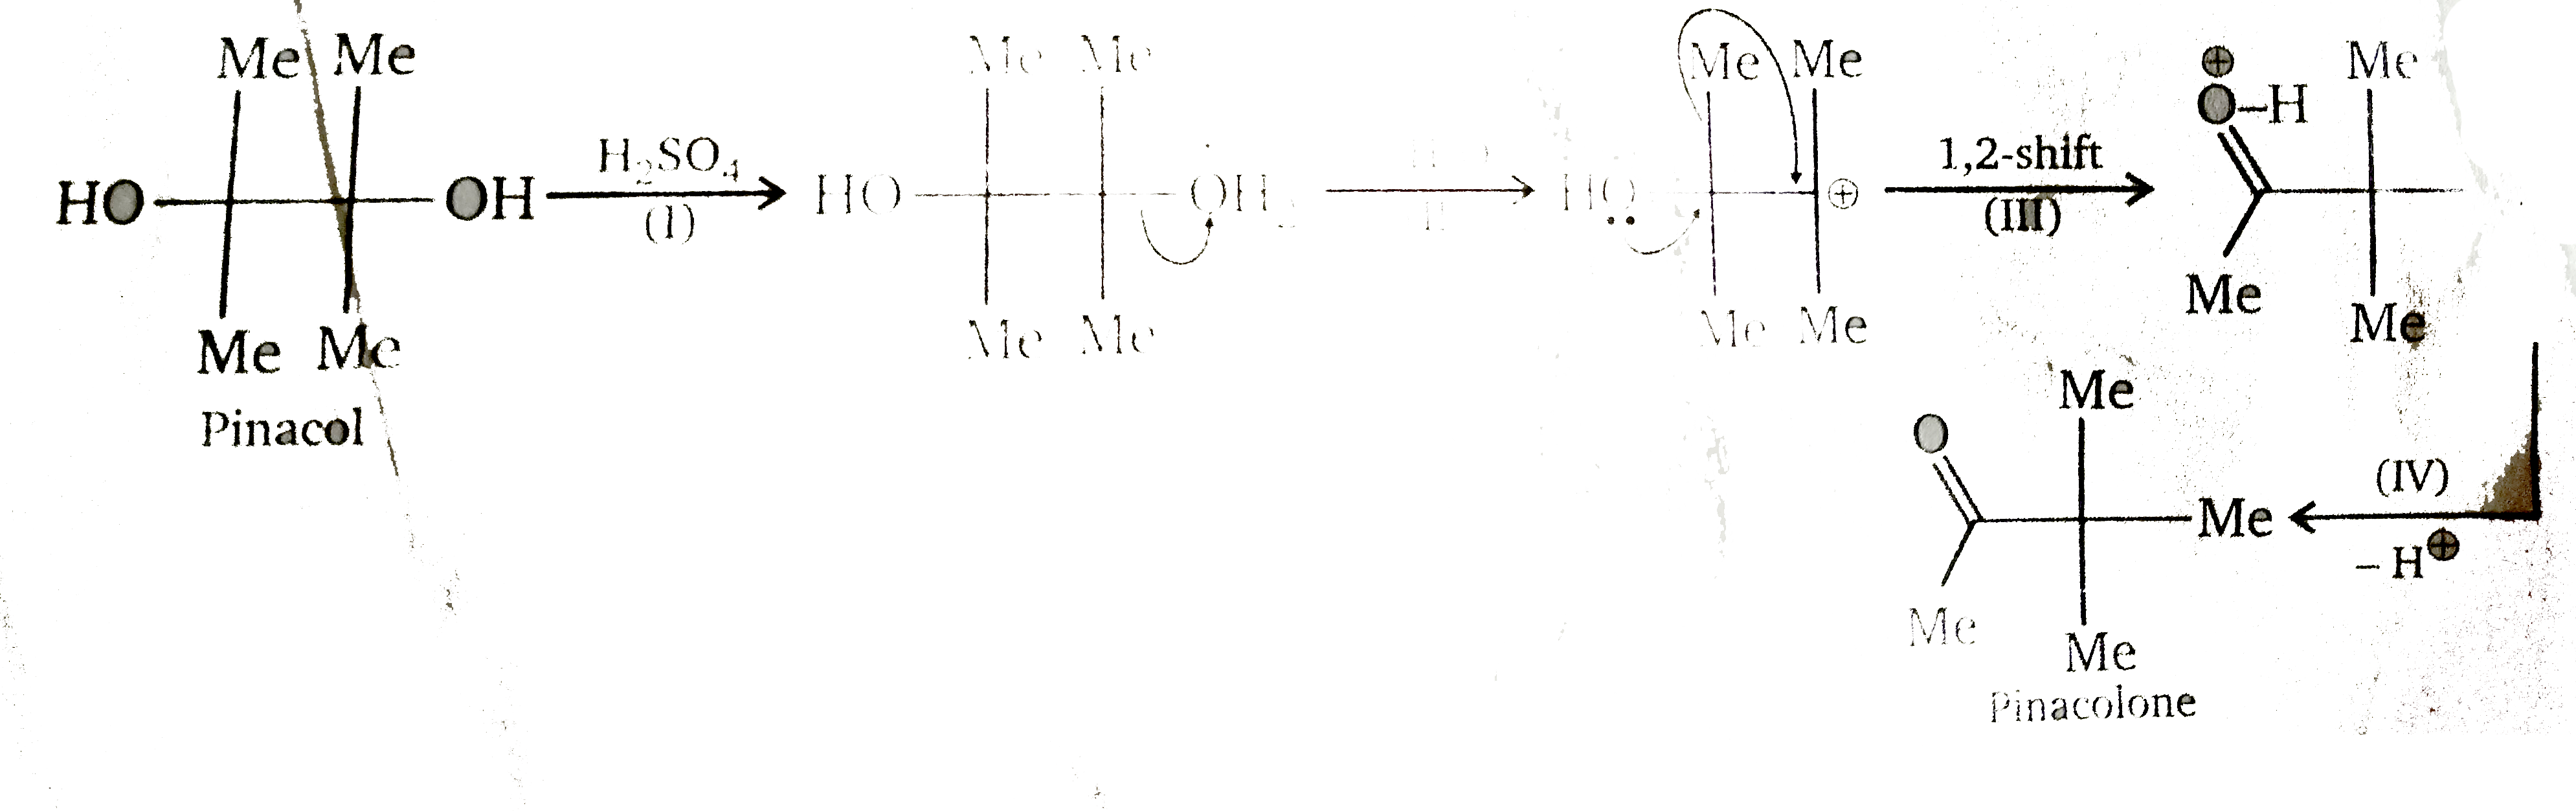 Di-tert-glycols rearrange in the presence of acid to give alpha-trtiary ketones. The trivial name of the simplest glycol of this type is pinacol, and this type of reaction therefore is named pinacol rearrangement (in this specific case, the reaction is called a pinacol-pinacolone rearrangement). The rearrangement involves 4 steps. one of the hydroxyl group is protonated in the first step. A molecule of water is eliminated in the second step and a tertiary carbocation is formed. the carbocation rearranges in the third step into a more stable carboxonium ion via a [1, 2] rearrangement. In the last step, the carboxonium ion is deprotonated and the product ketone is obtained.         Product (A) is :